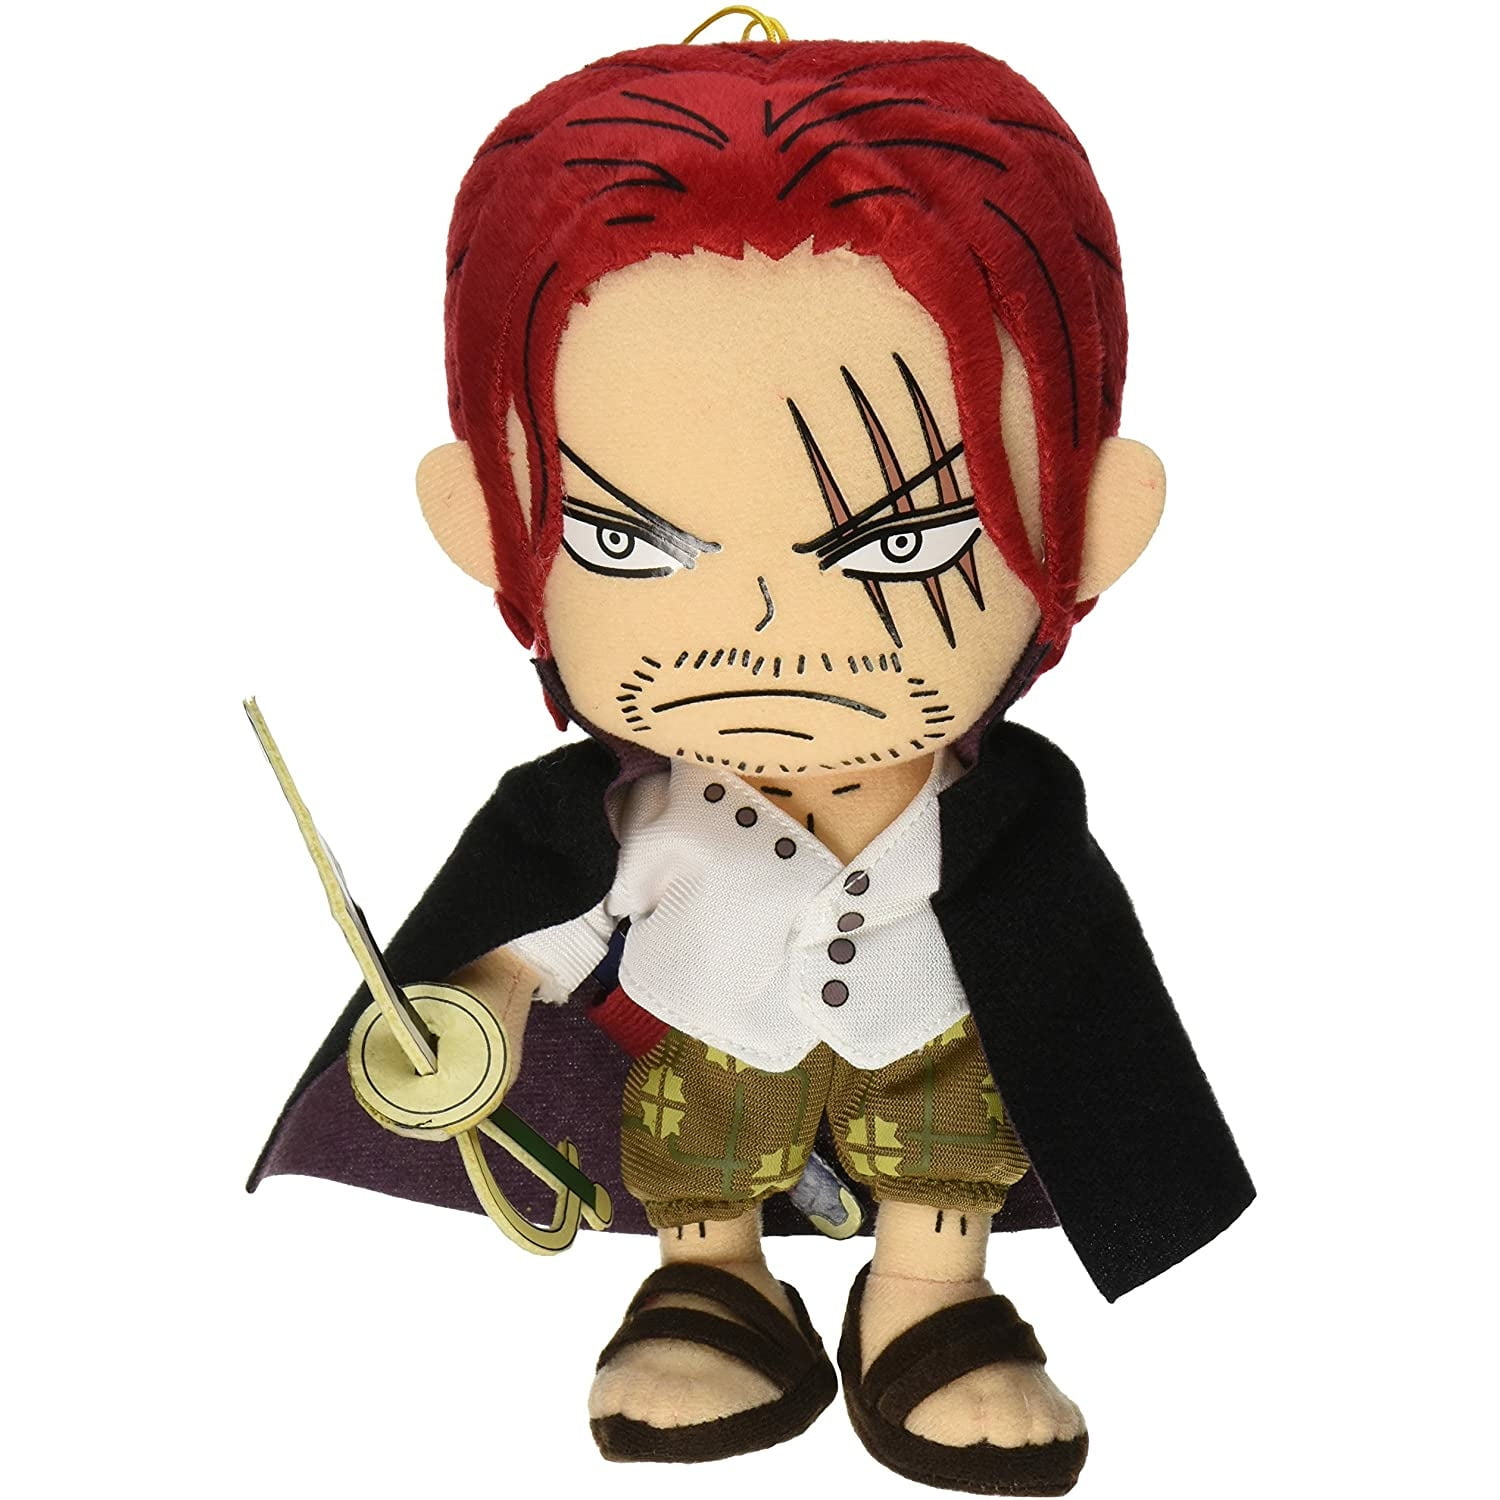 Plush - One Piece - New Shanks 8'' Soft Doll Anime Licensed ge52723 -  